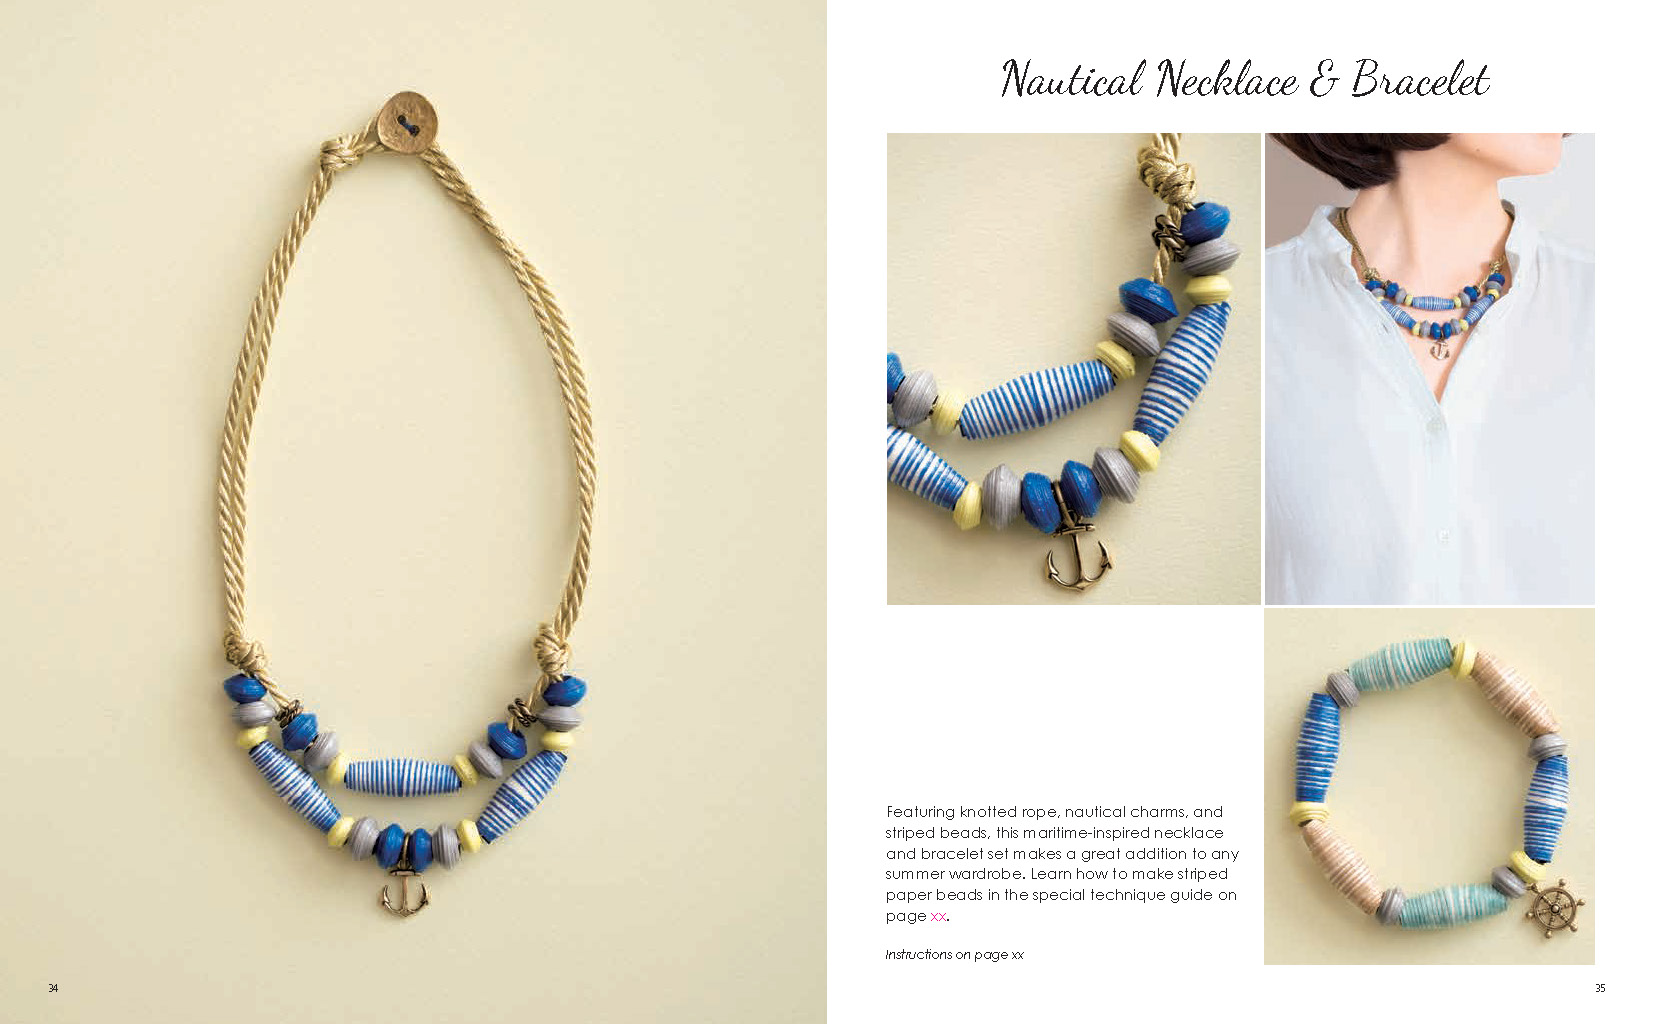 Step-by-step instructions for 40 Paper Bead Jewelry designs